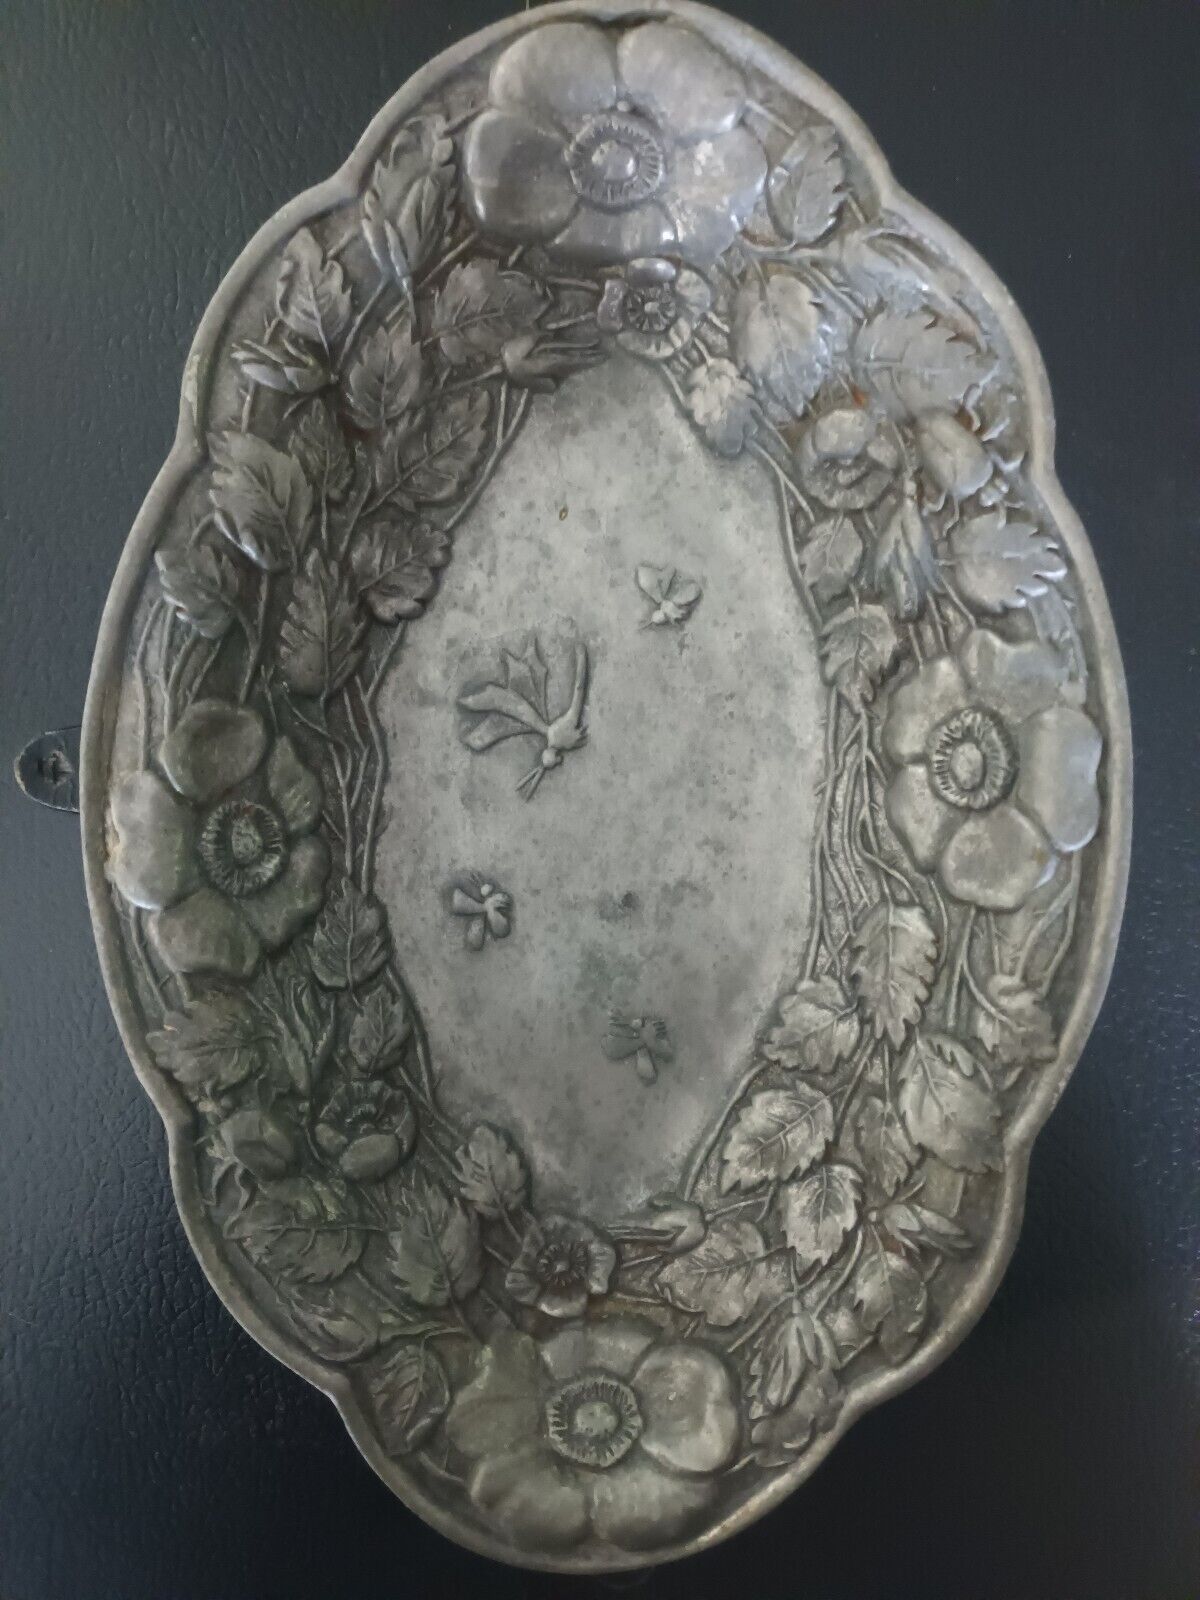  Art Nouveau Pewter Tray with flowers & insects